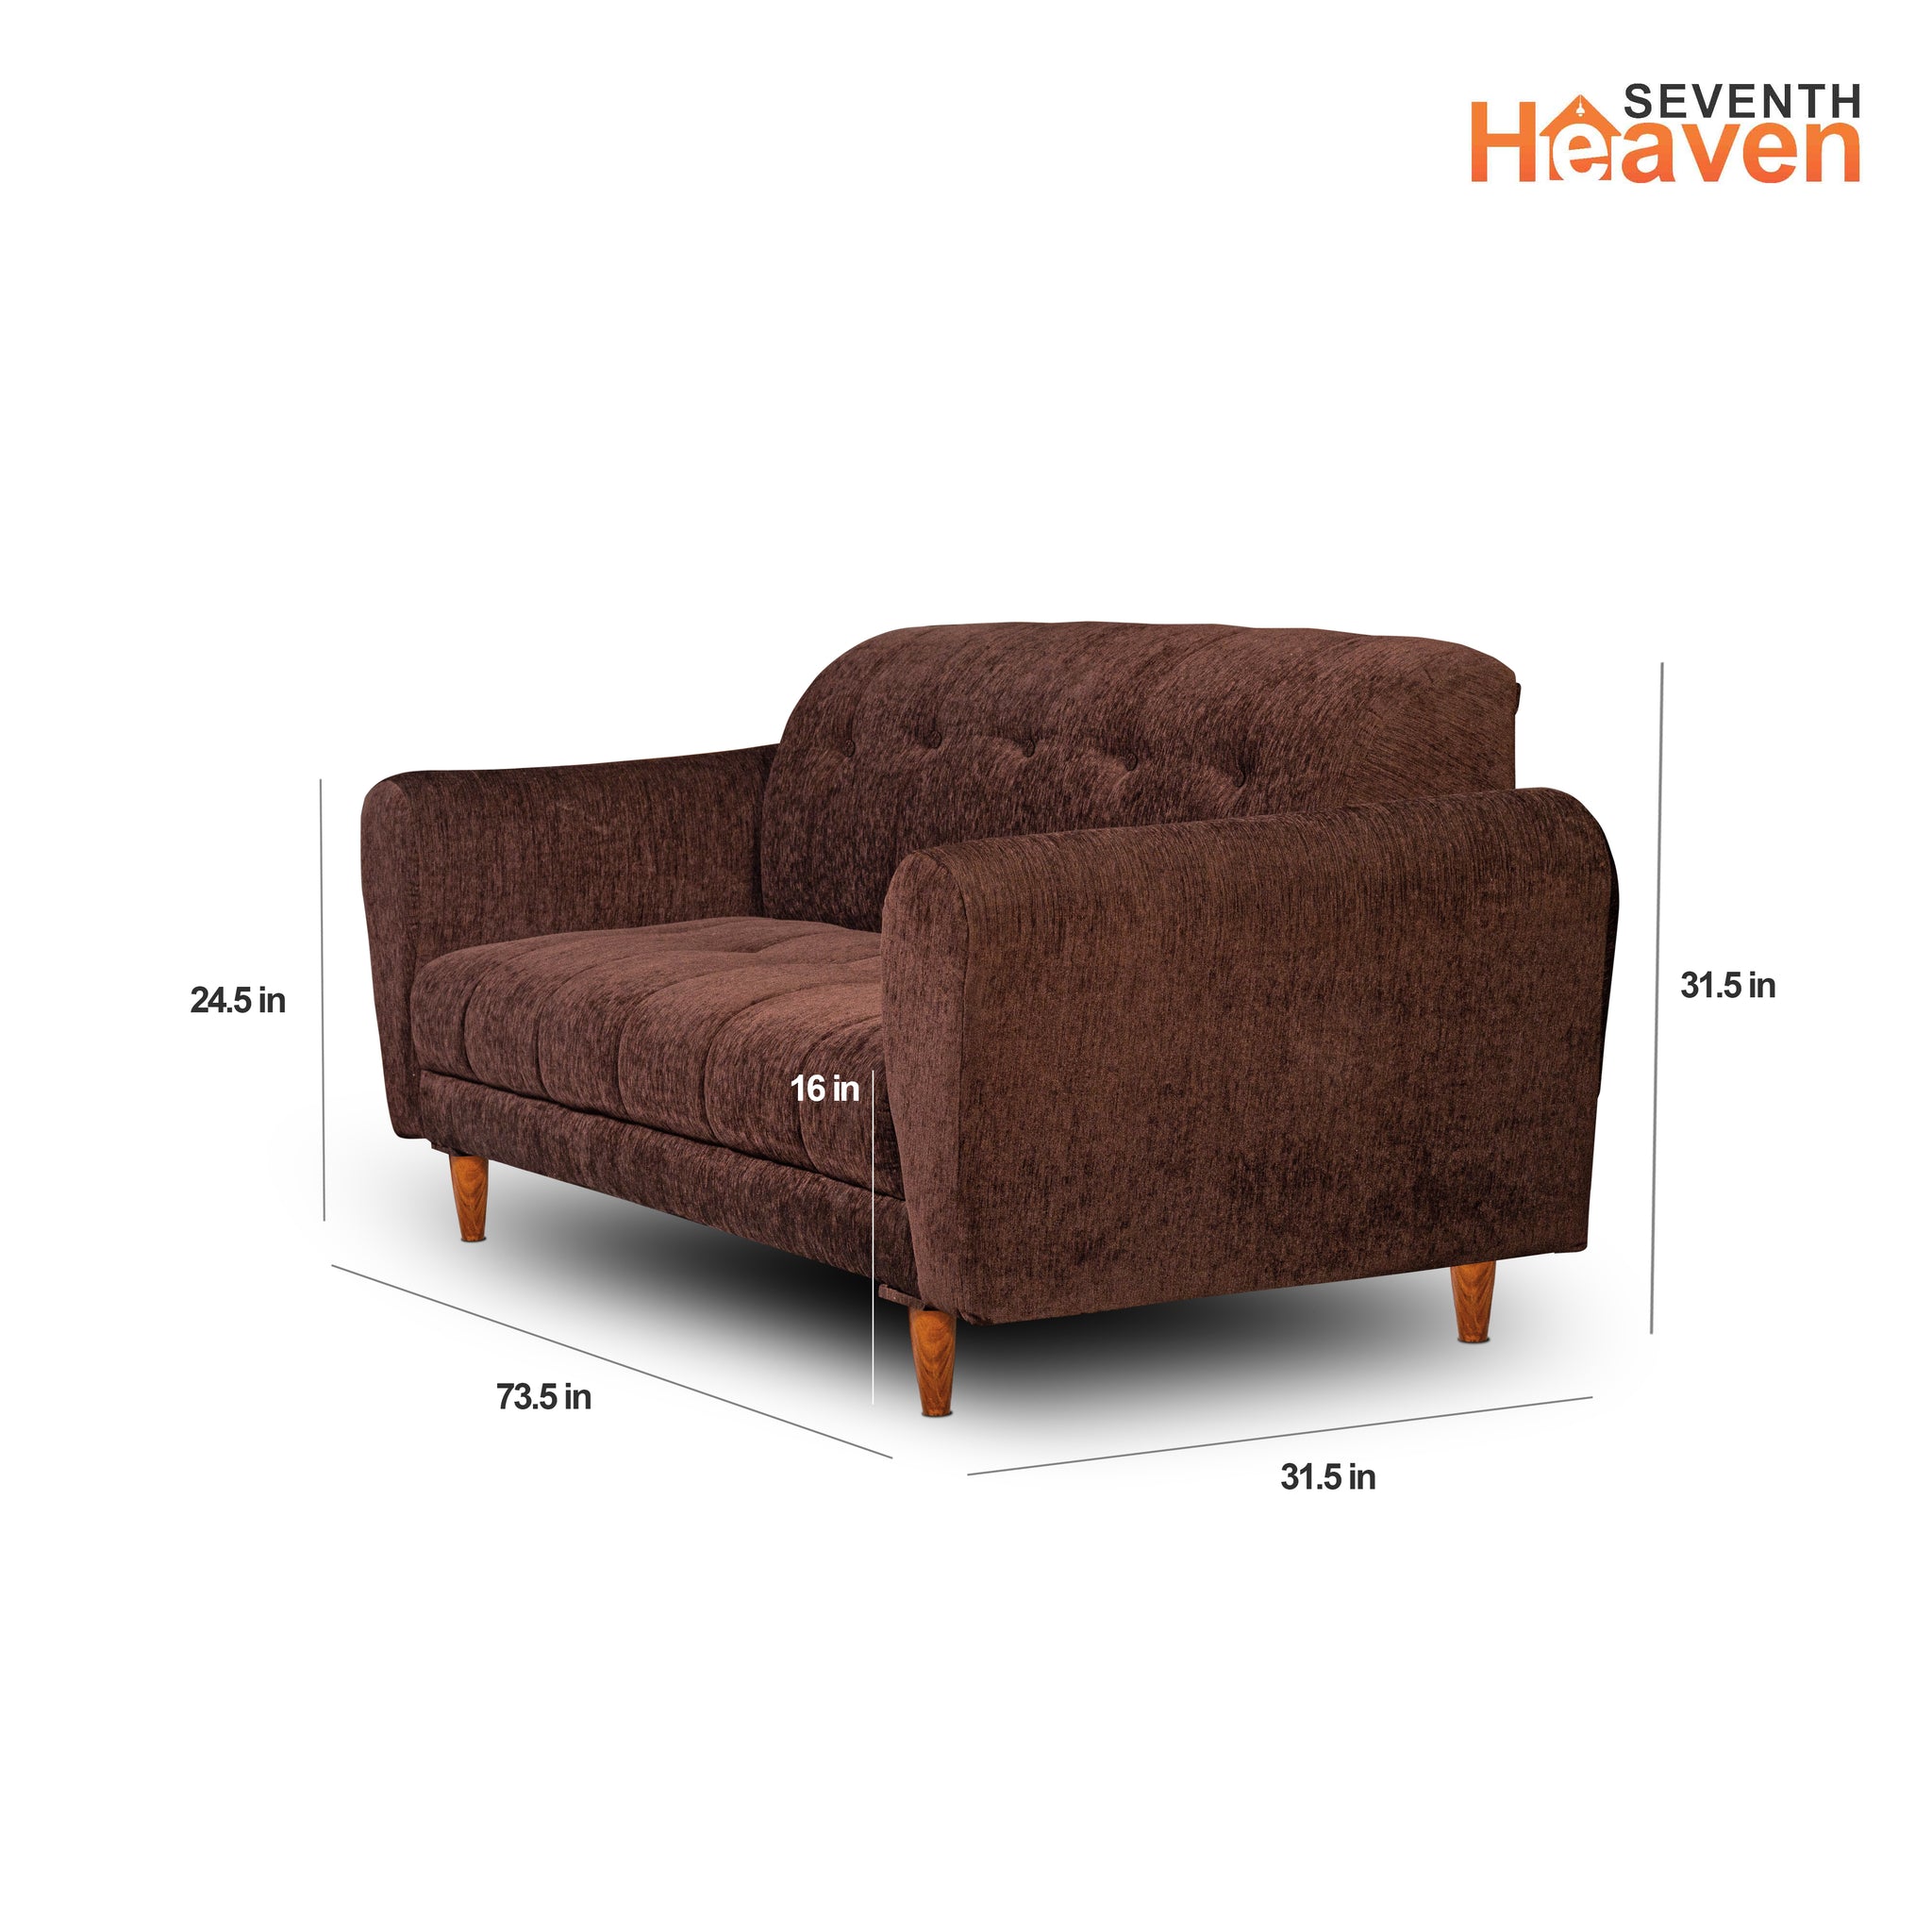 Seventh Heaven Milan 3 Seater Wooden Sofa Set Modern & Elegant Smart Furniture Range for luxurious homes, living rooms and offices. Brown Colour Molphino fabric with sheesham polished wooden legs. Product dimensions are also mentioned.